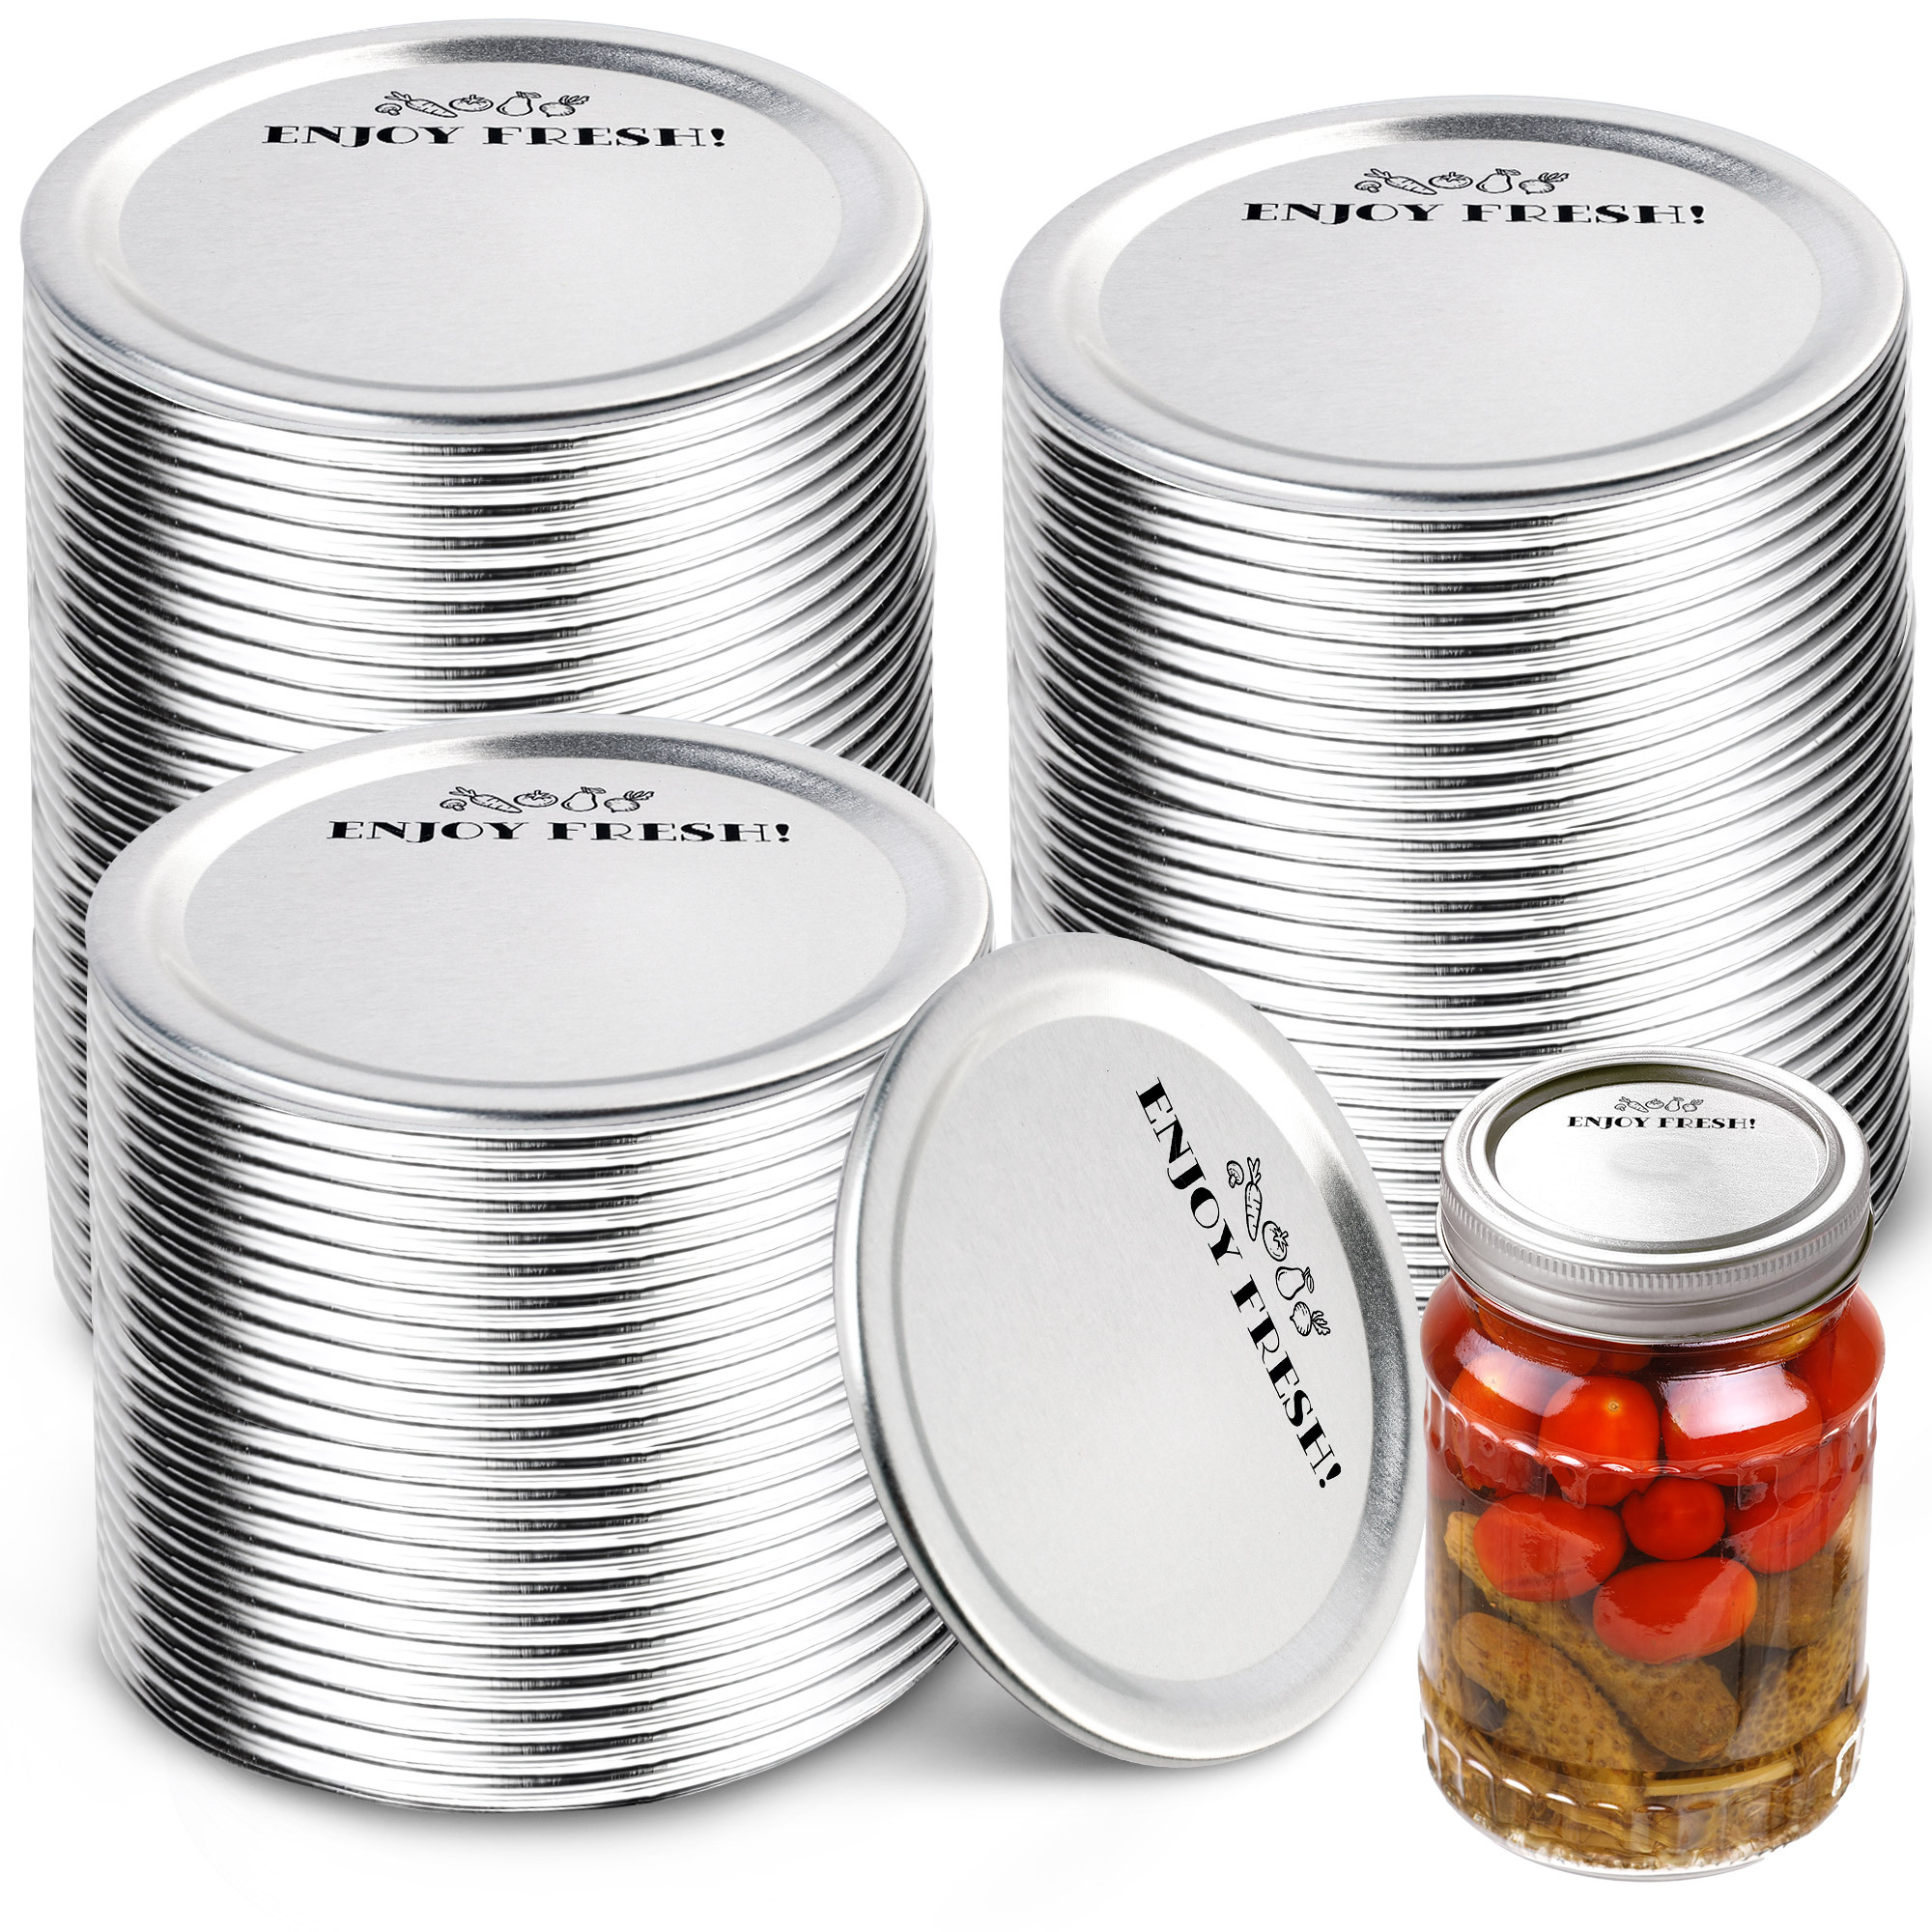 

Lotfancy Wide Mouth Canning Lids, 86mm Metal Mason Jar Lids For Ball, , 114 Counts